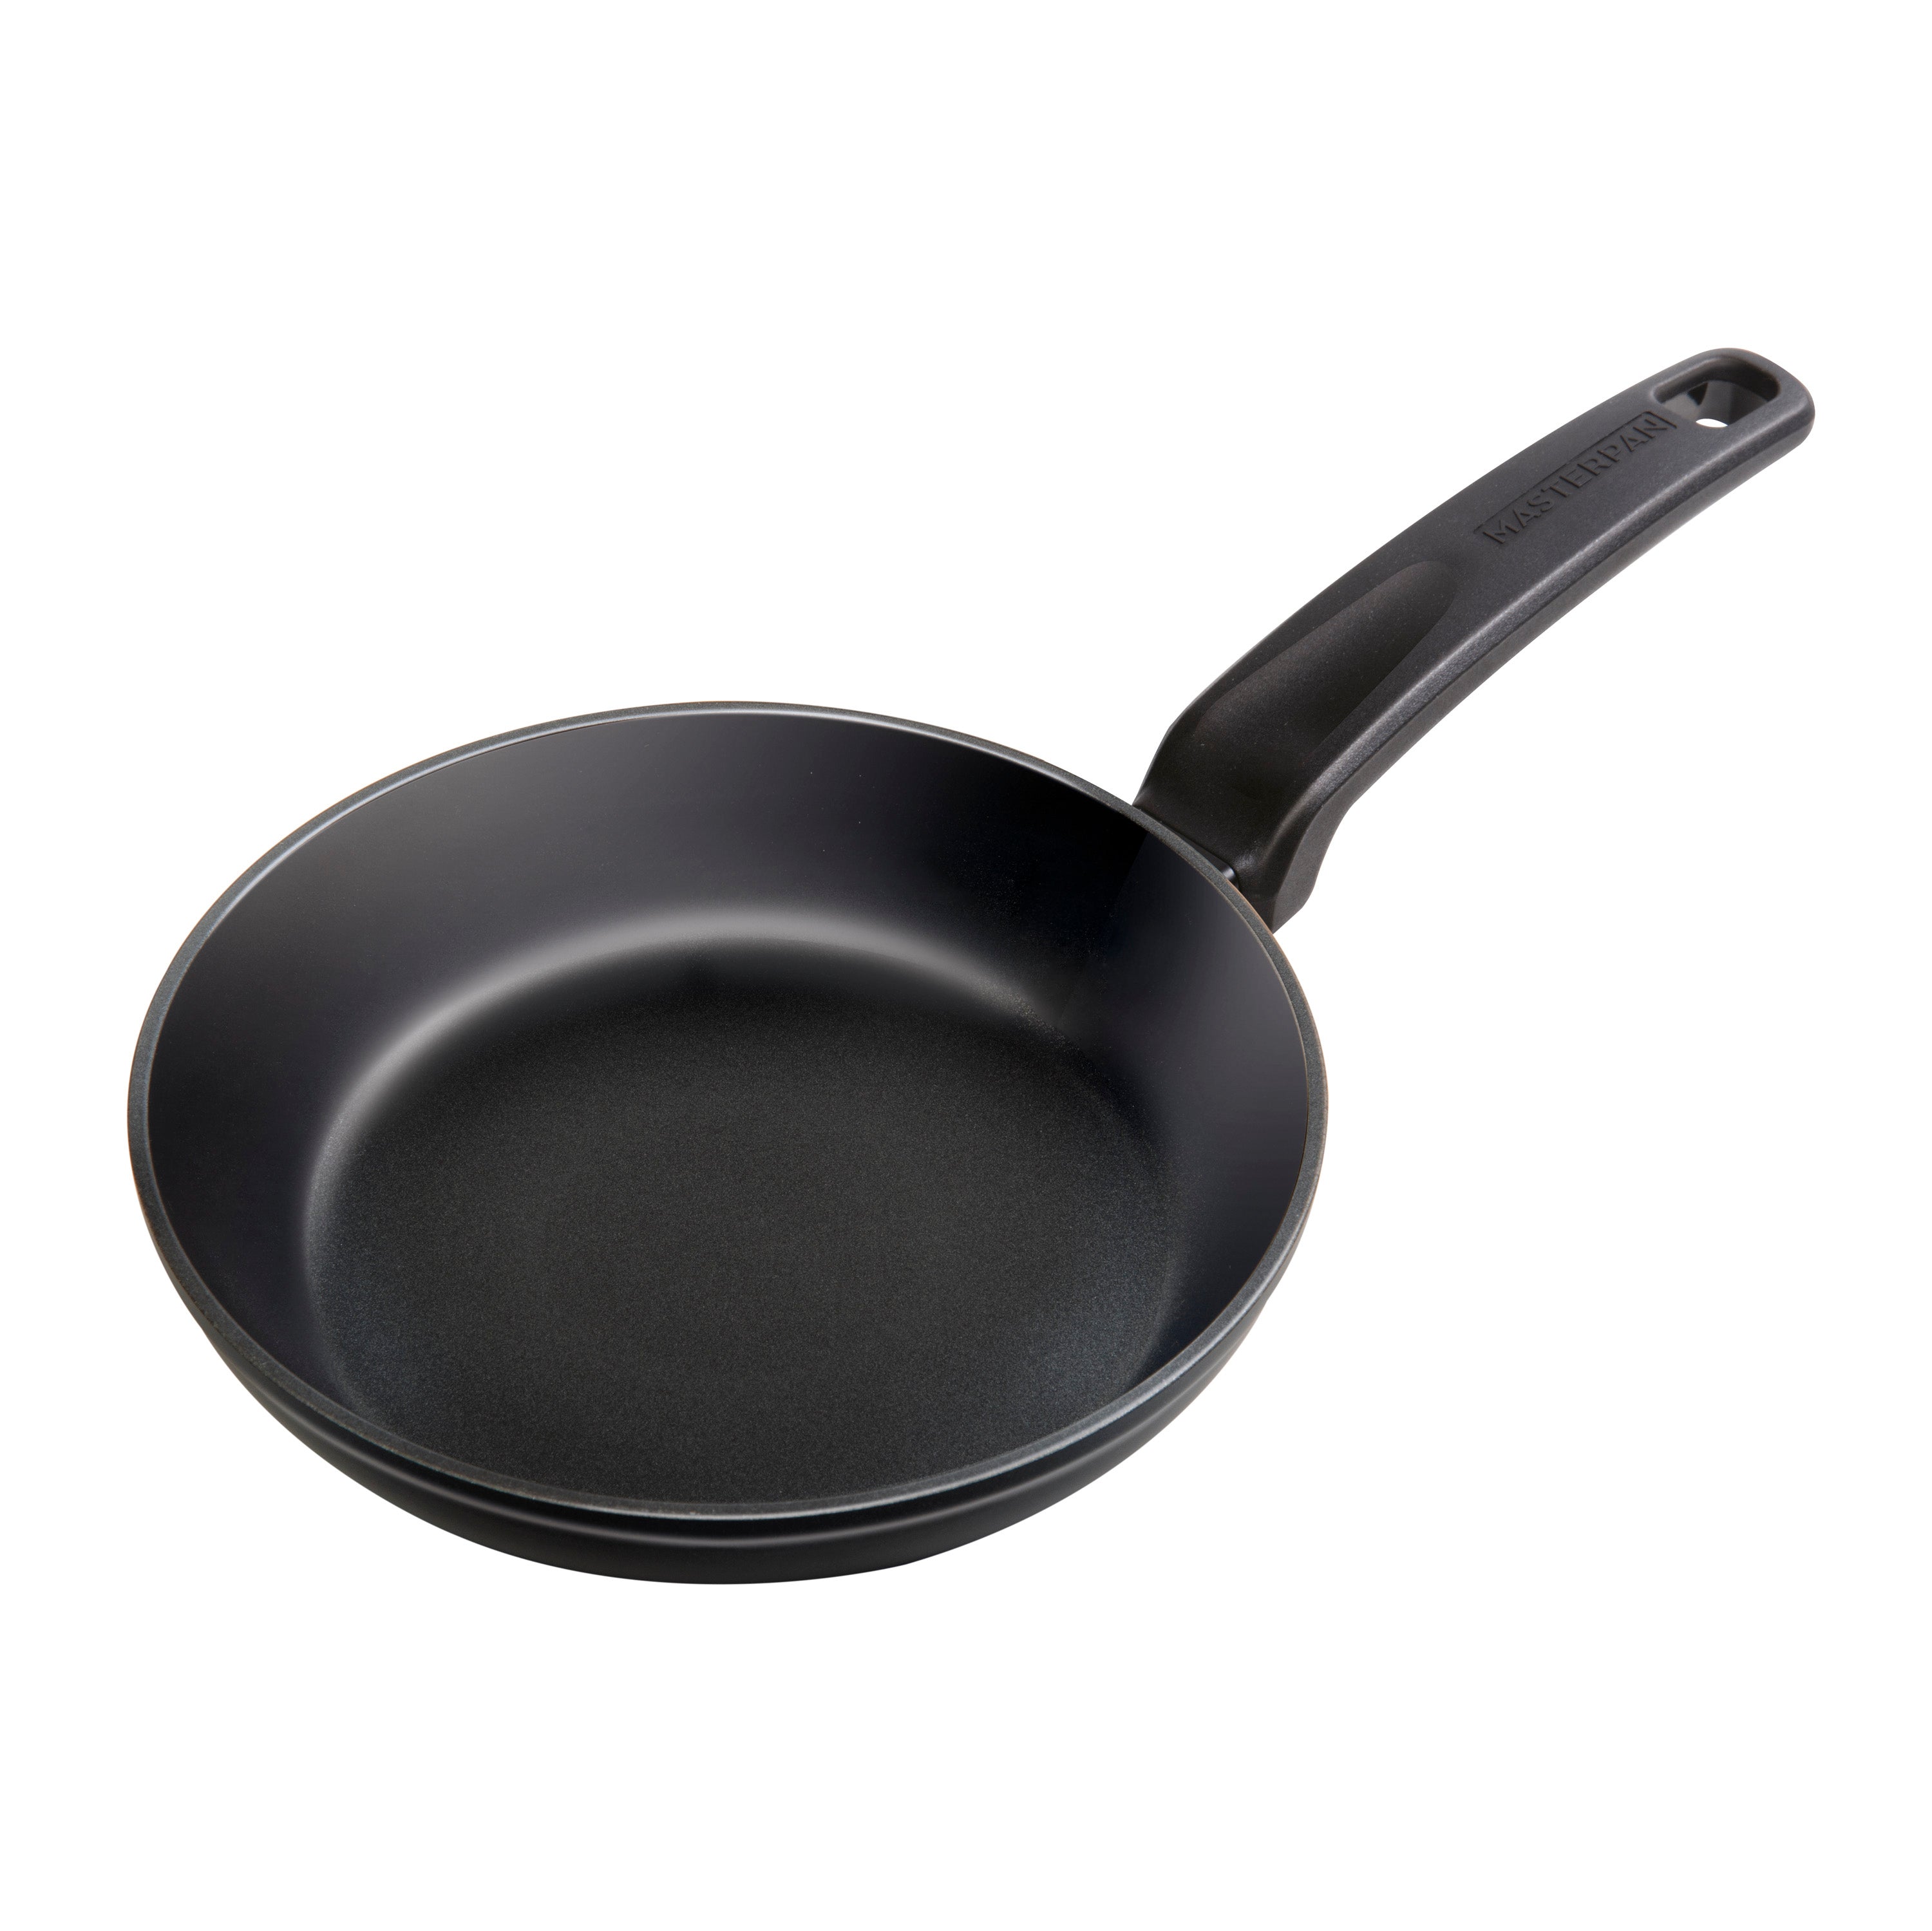 Master Pan Non-Stick 3 Section Meal Skillet